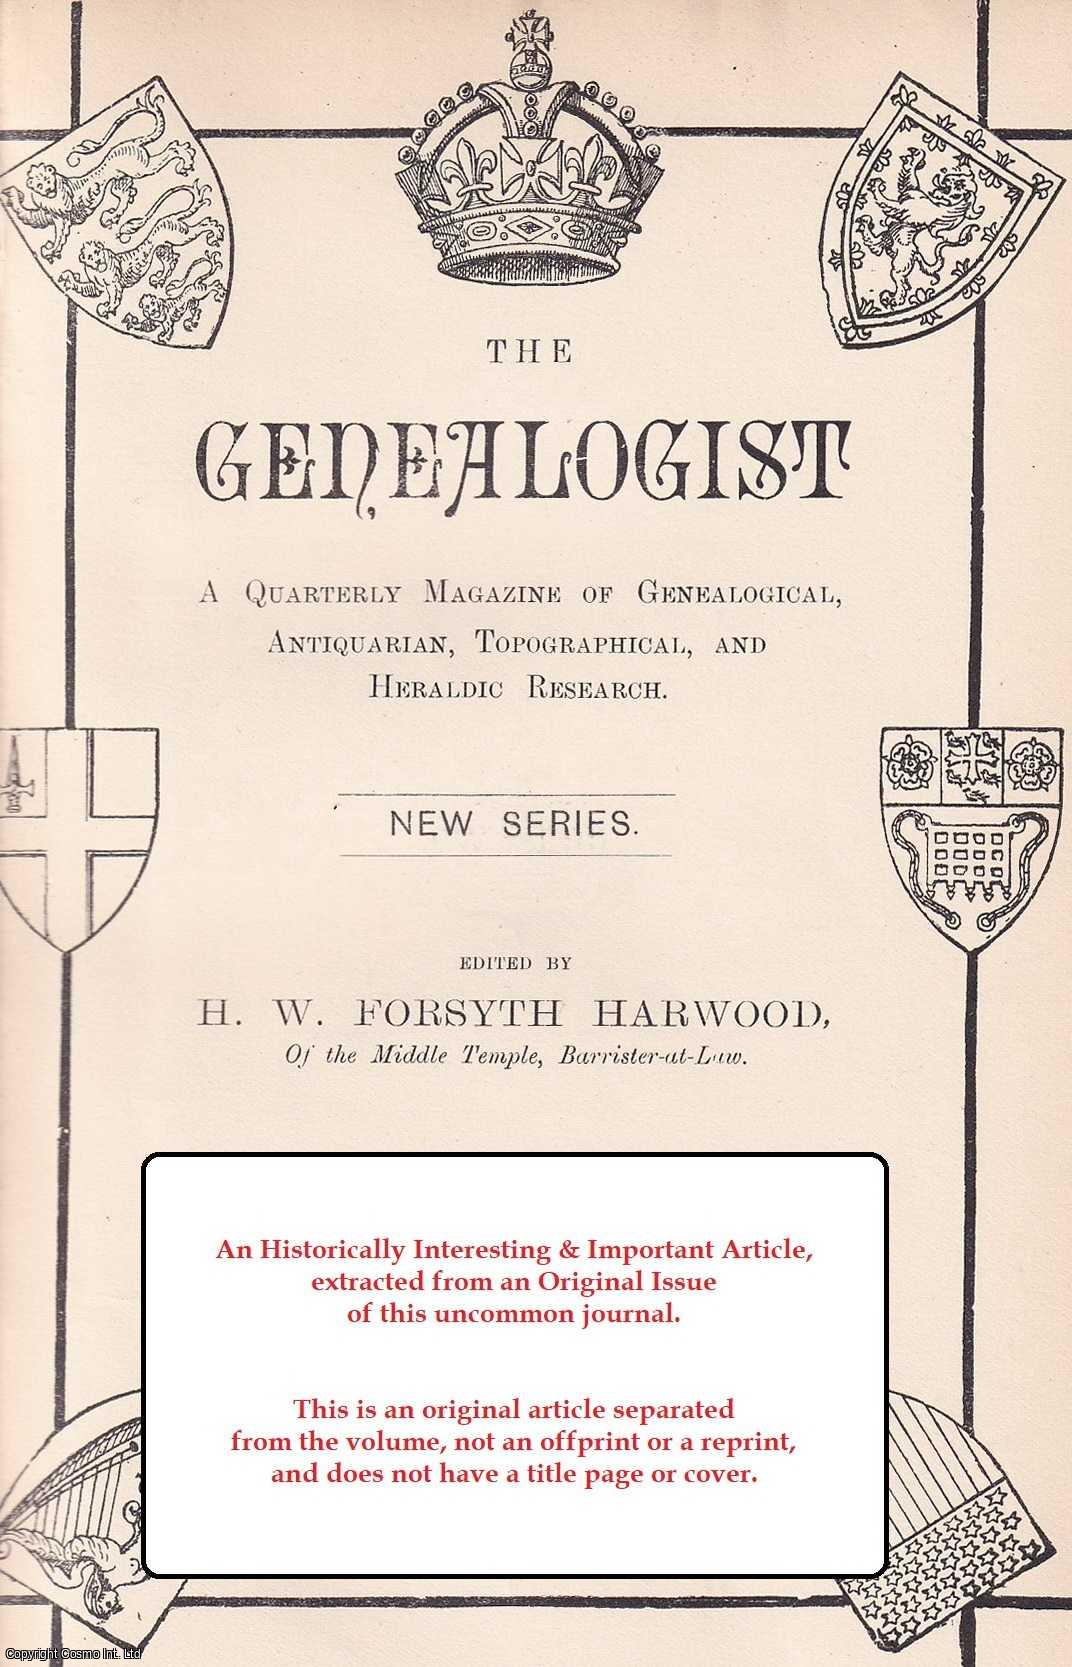 Henry Barkly - Testa de Nevill. Observations on The Two Ancient Registers - Part I. An original article from The Genealogist, 1888.